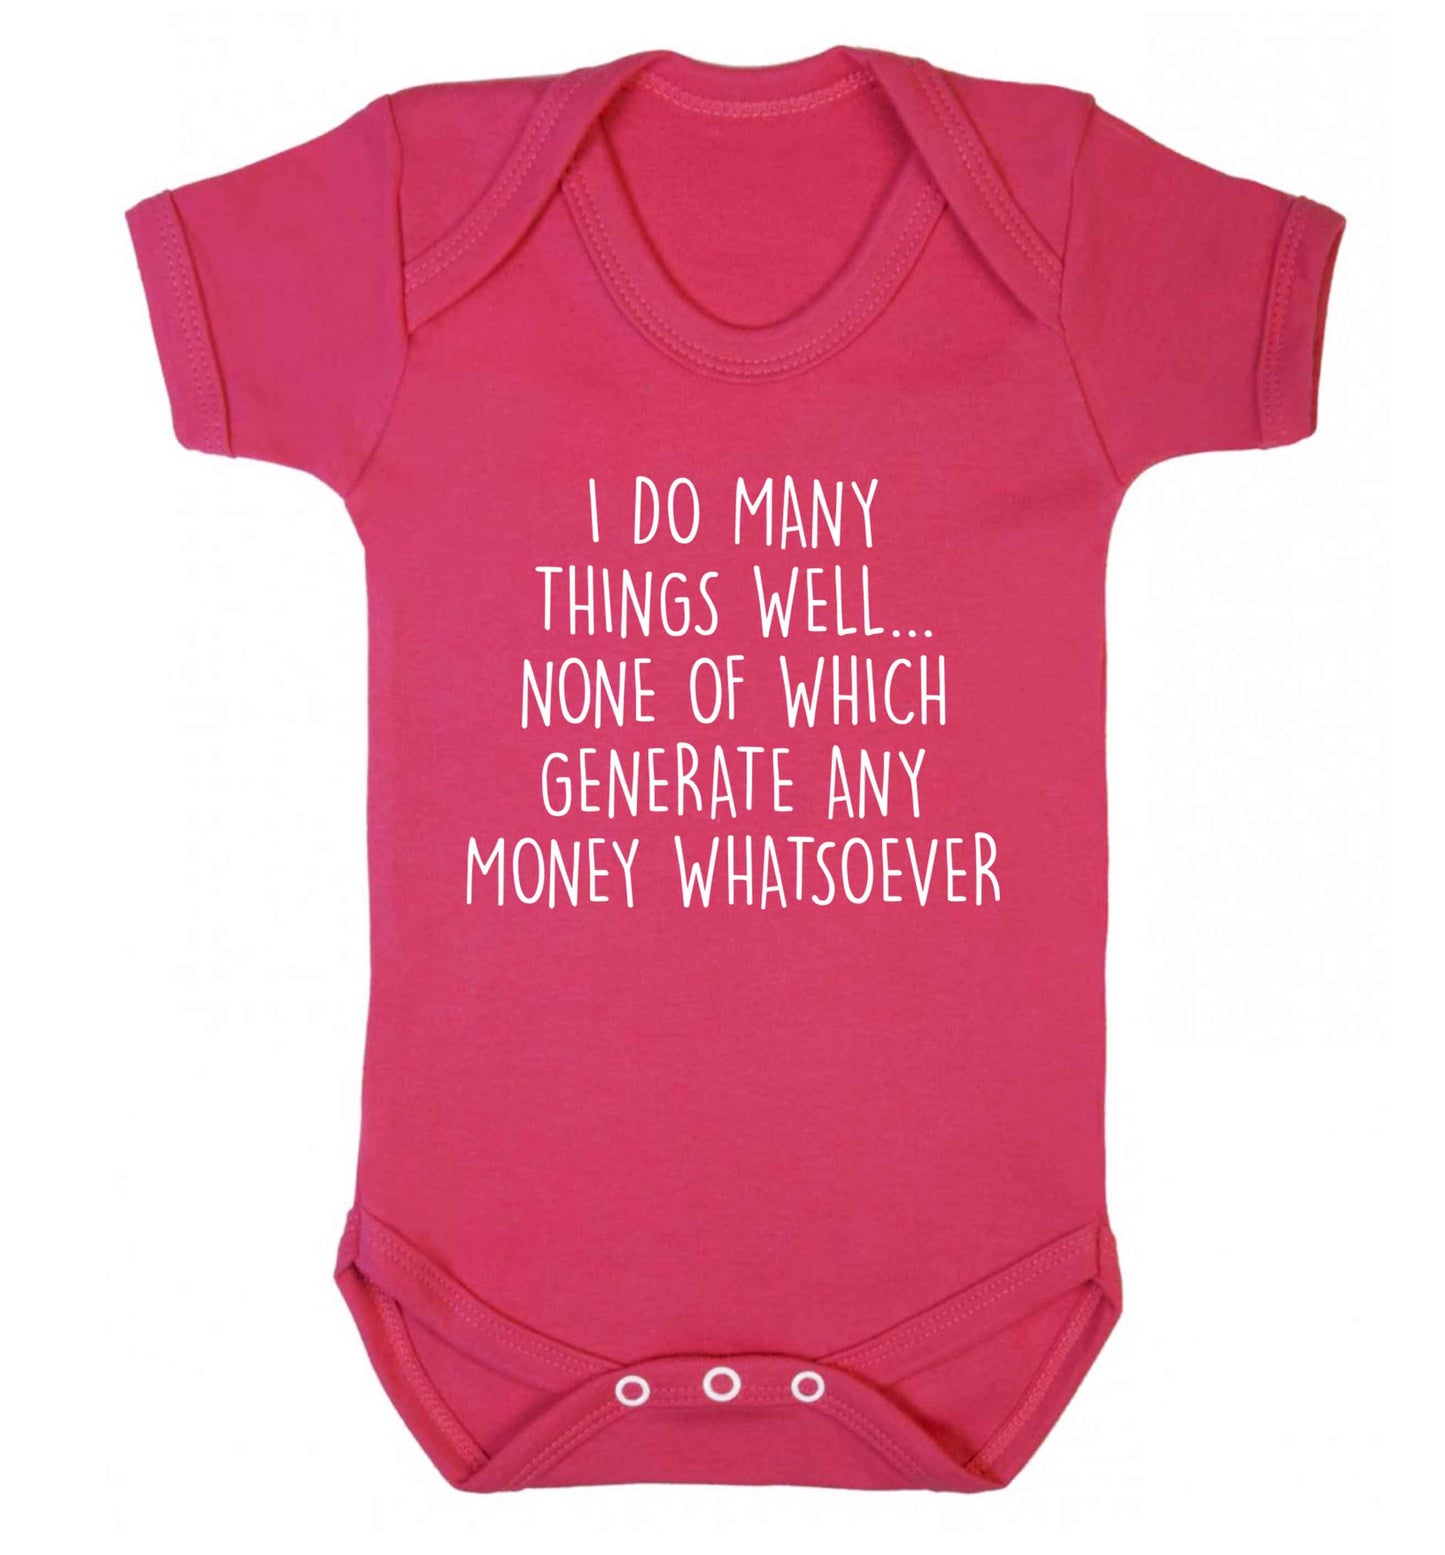 I do many things well none of which generate income Baby Vest dark pink 18-24 months